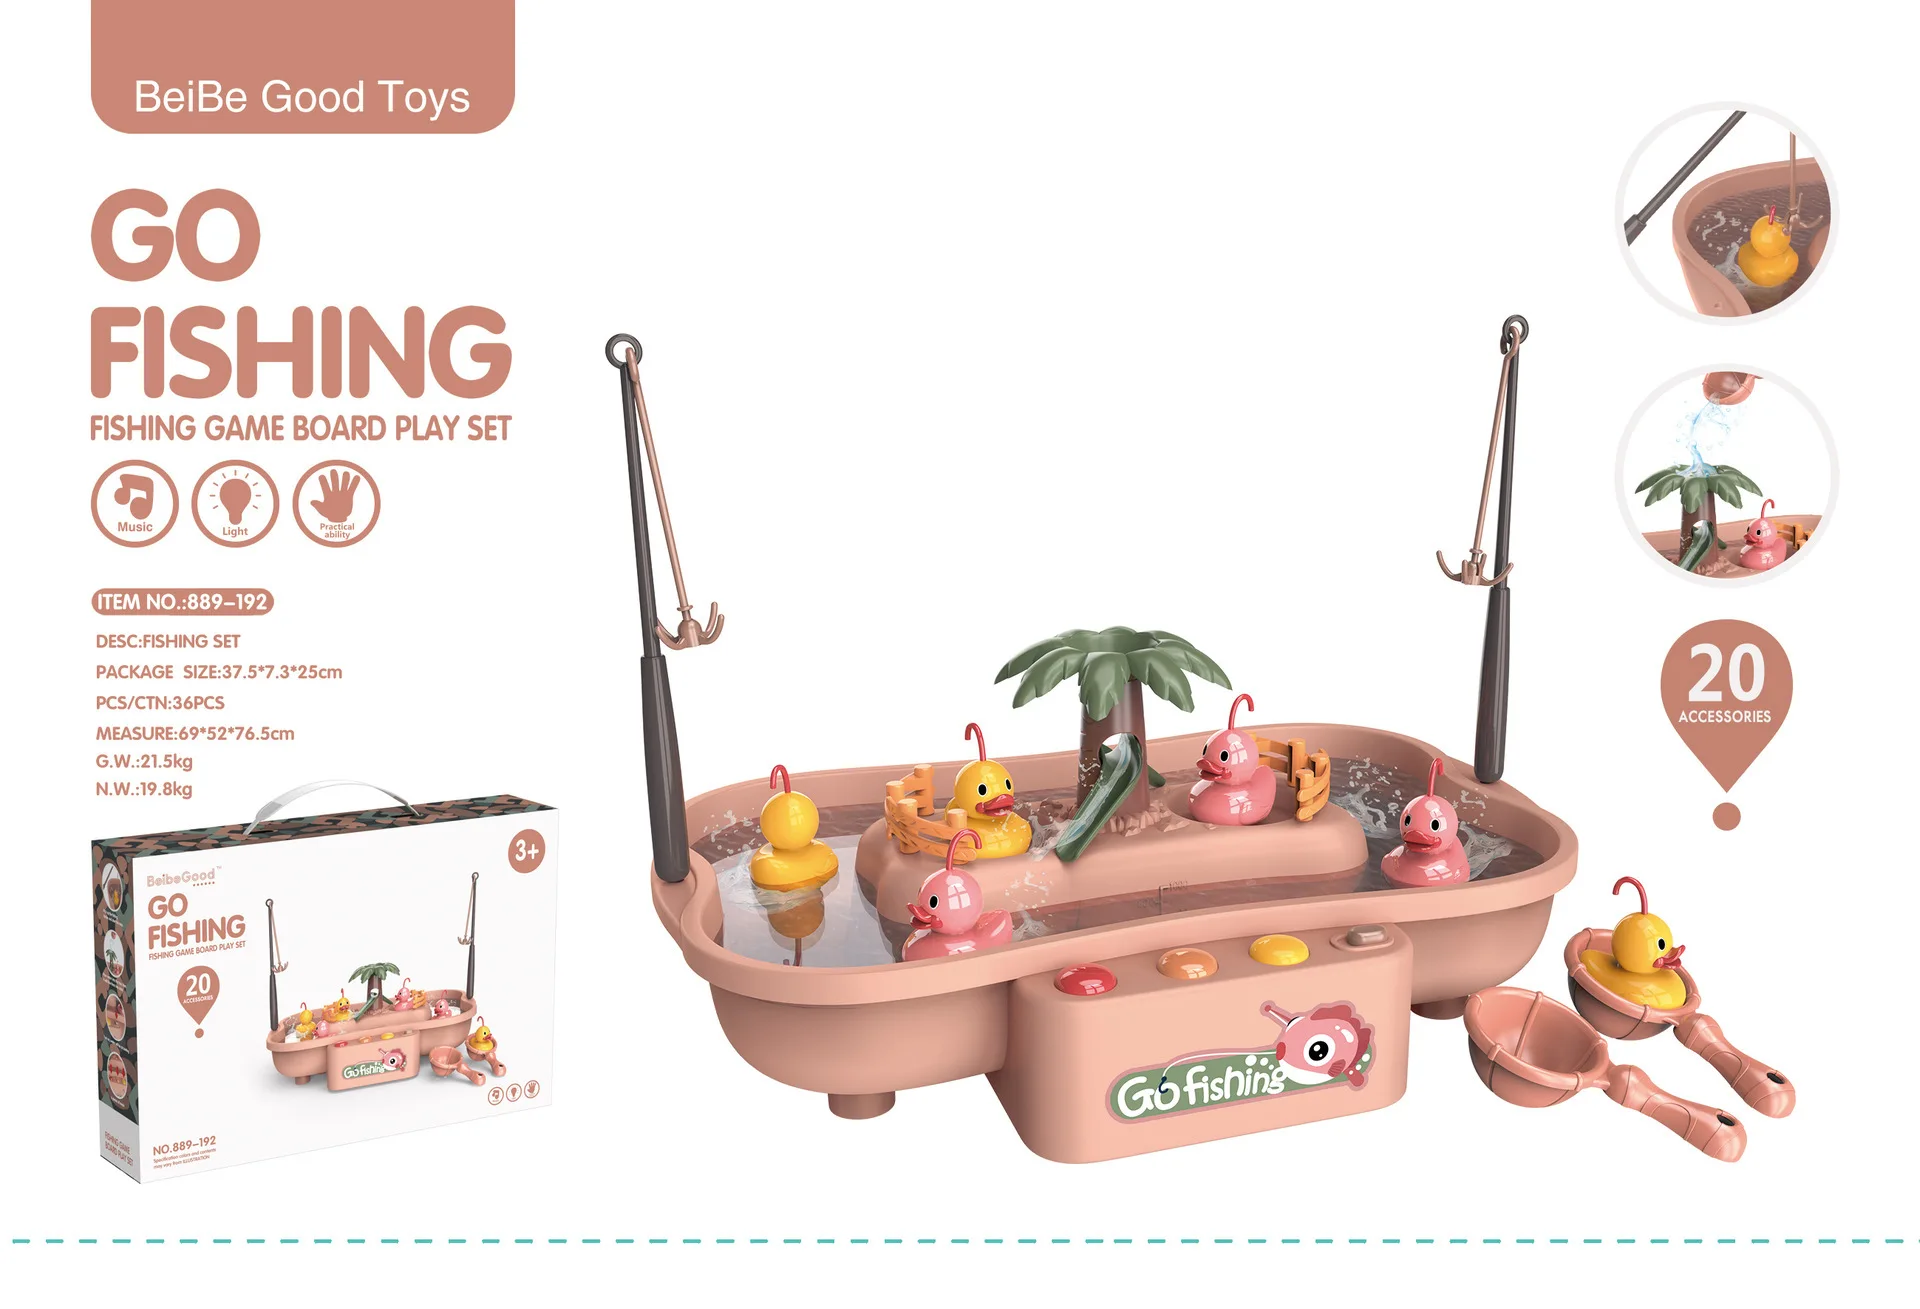 Children's Magnetic Fishing Toy Music Electric Circulation Fishing Duck Fishing Platform Water Play Game Toys for Kids Gift